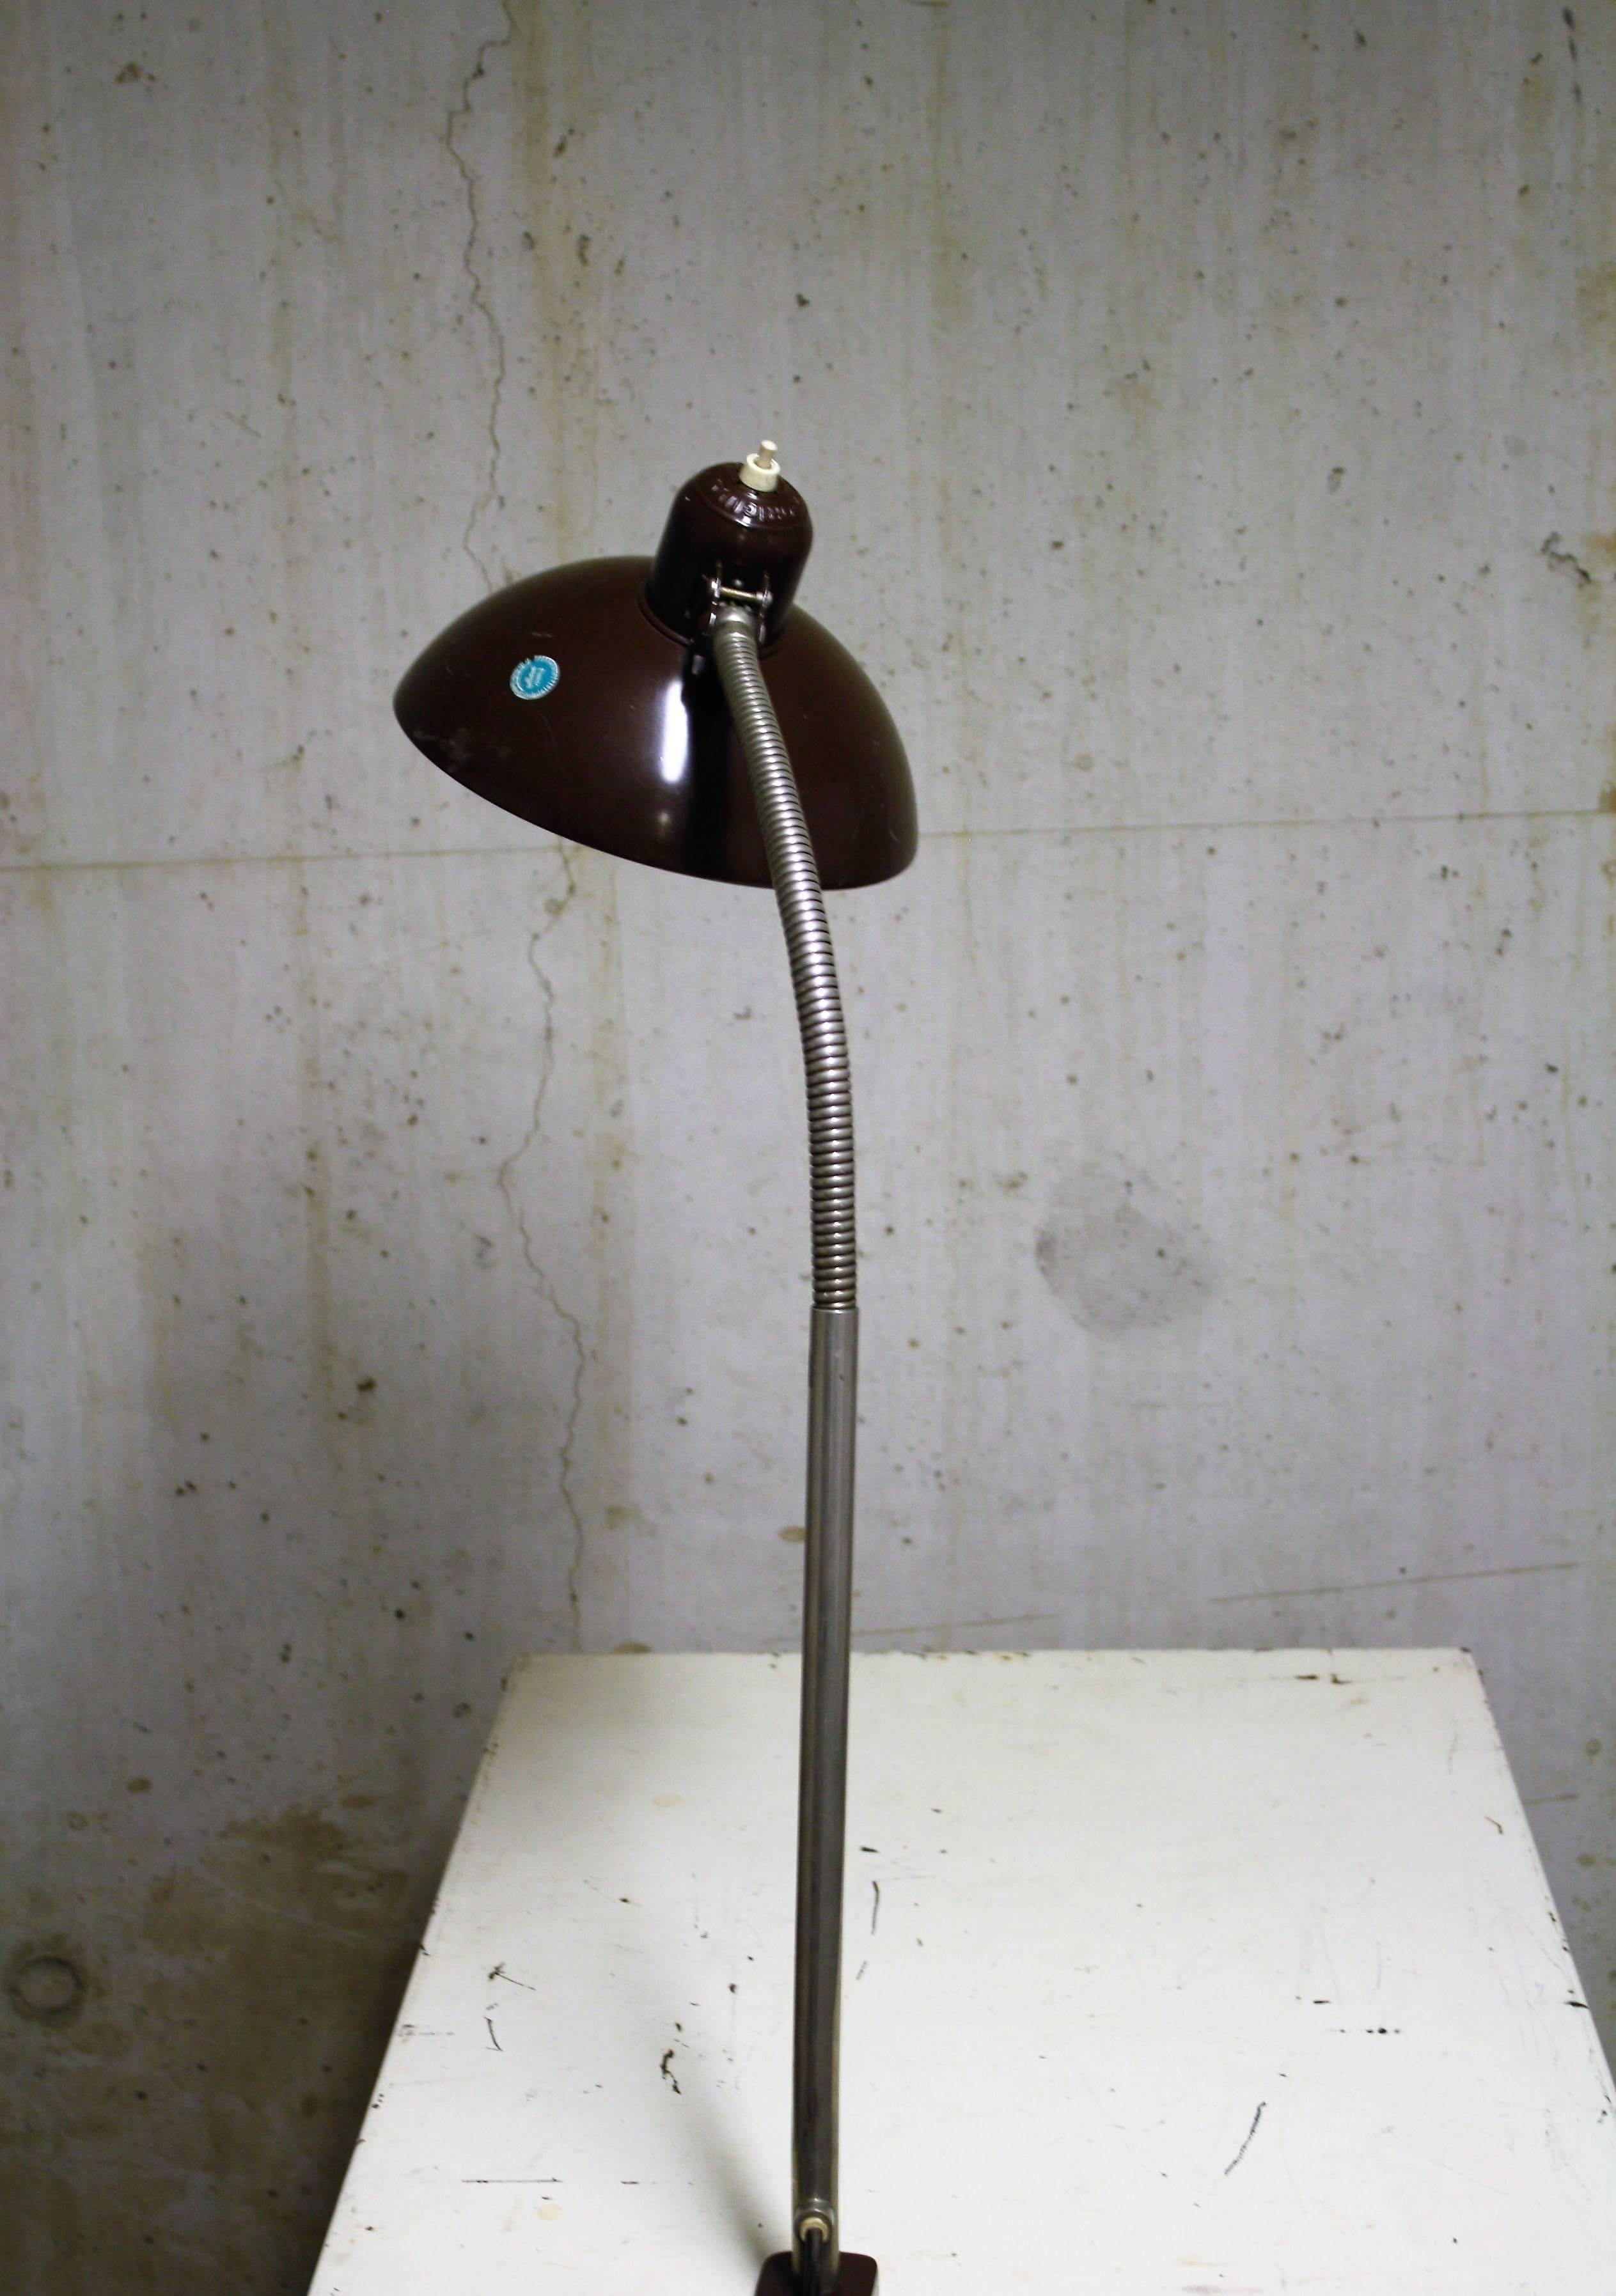 Vintage Industrial Kaiser Idell desk lamp or work light in brown metal.

It can be attached with the clamp to almost any desk or workbench.

The Bauhaus lamp has a flexible arm which makes the lamp very adjustable.

Rewired, tested and ready